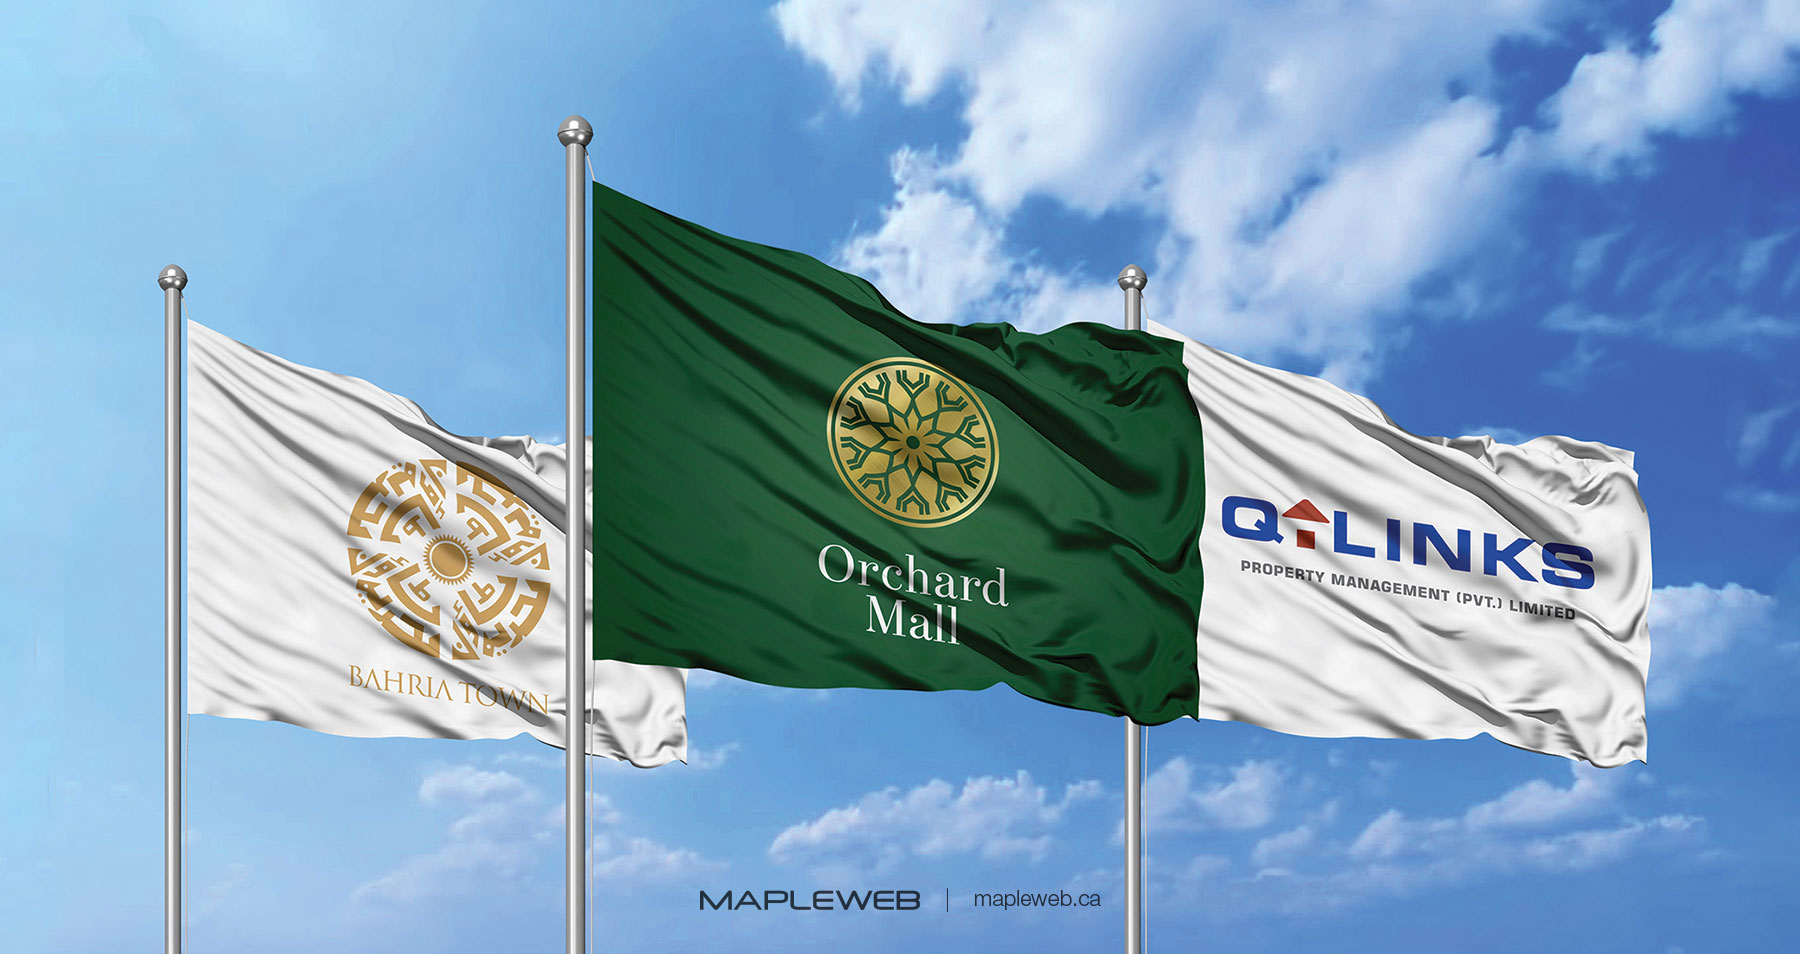 Orchard Mall Three Flags with Three Different Logo
 Brand design by Mapleweb